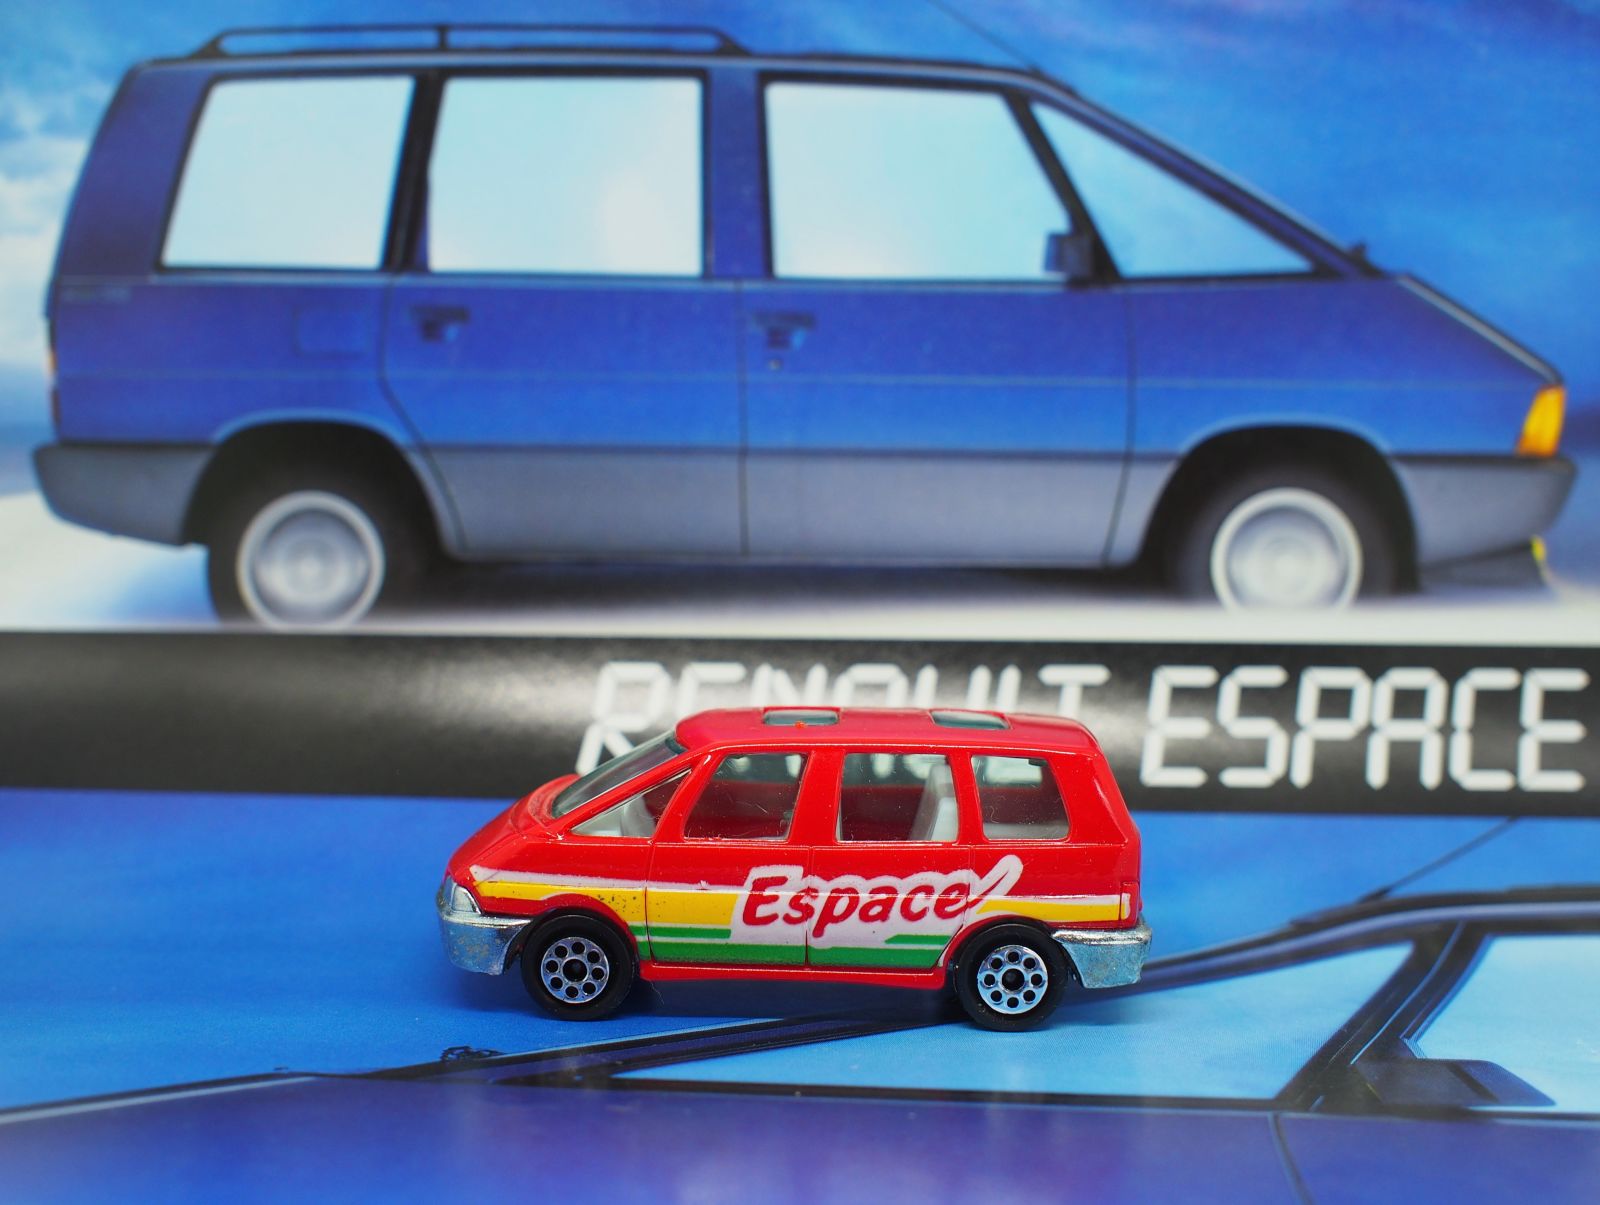 Illustration for article titled Radcast - Le Rad: Renault Espace By Novacar